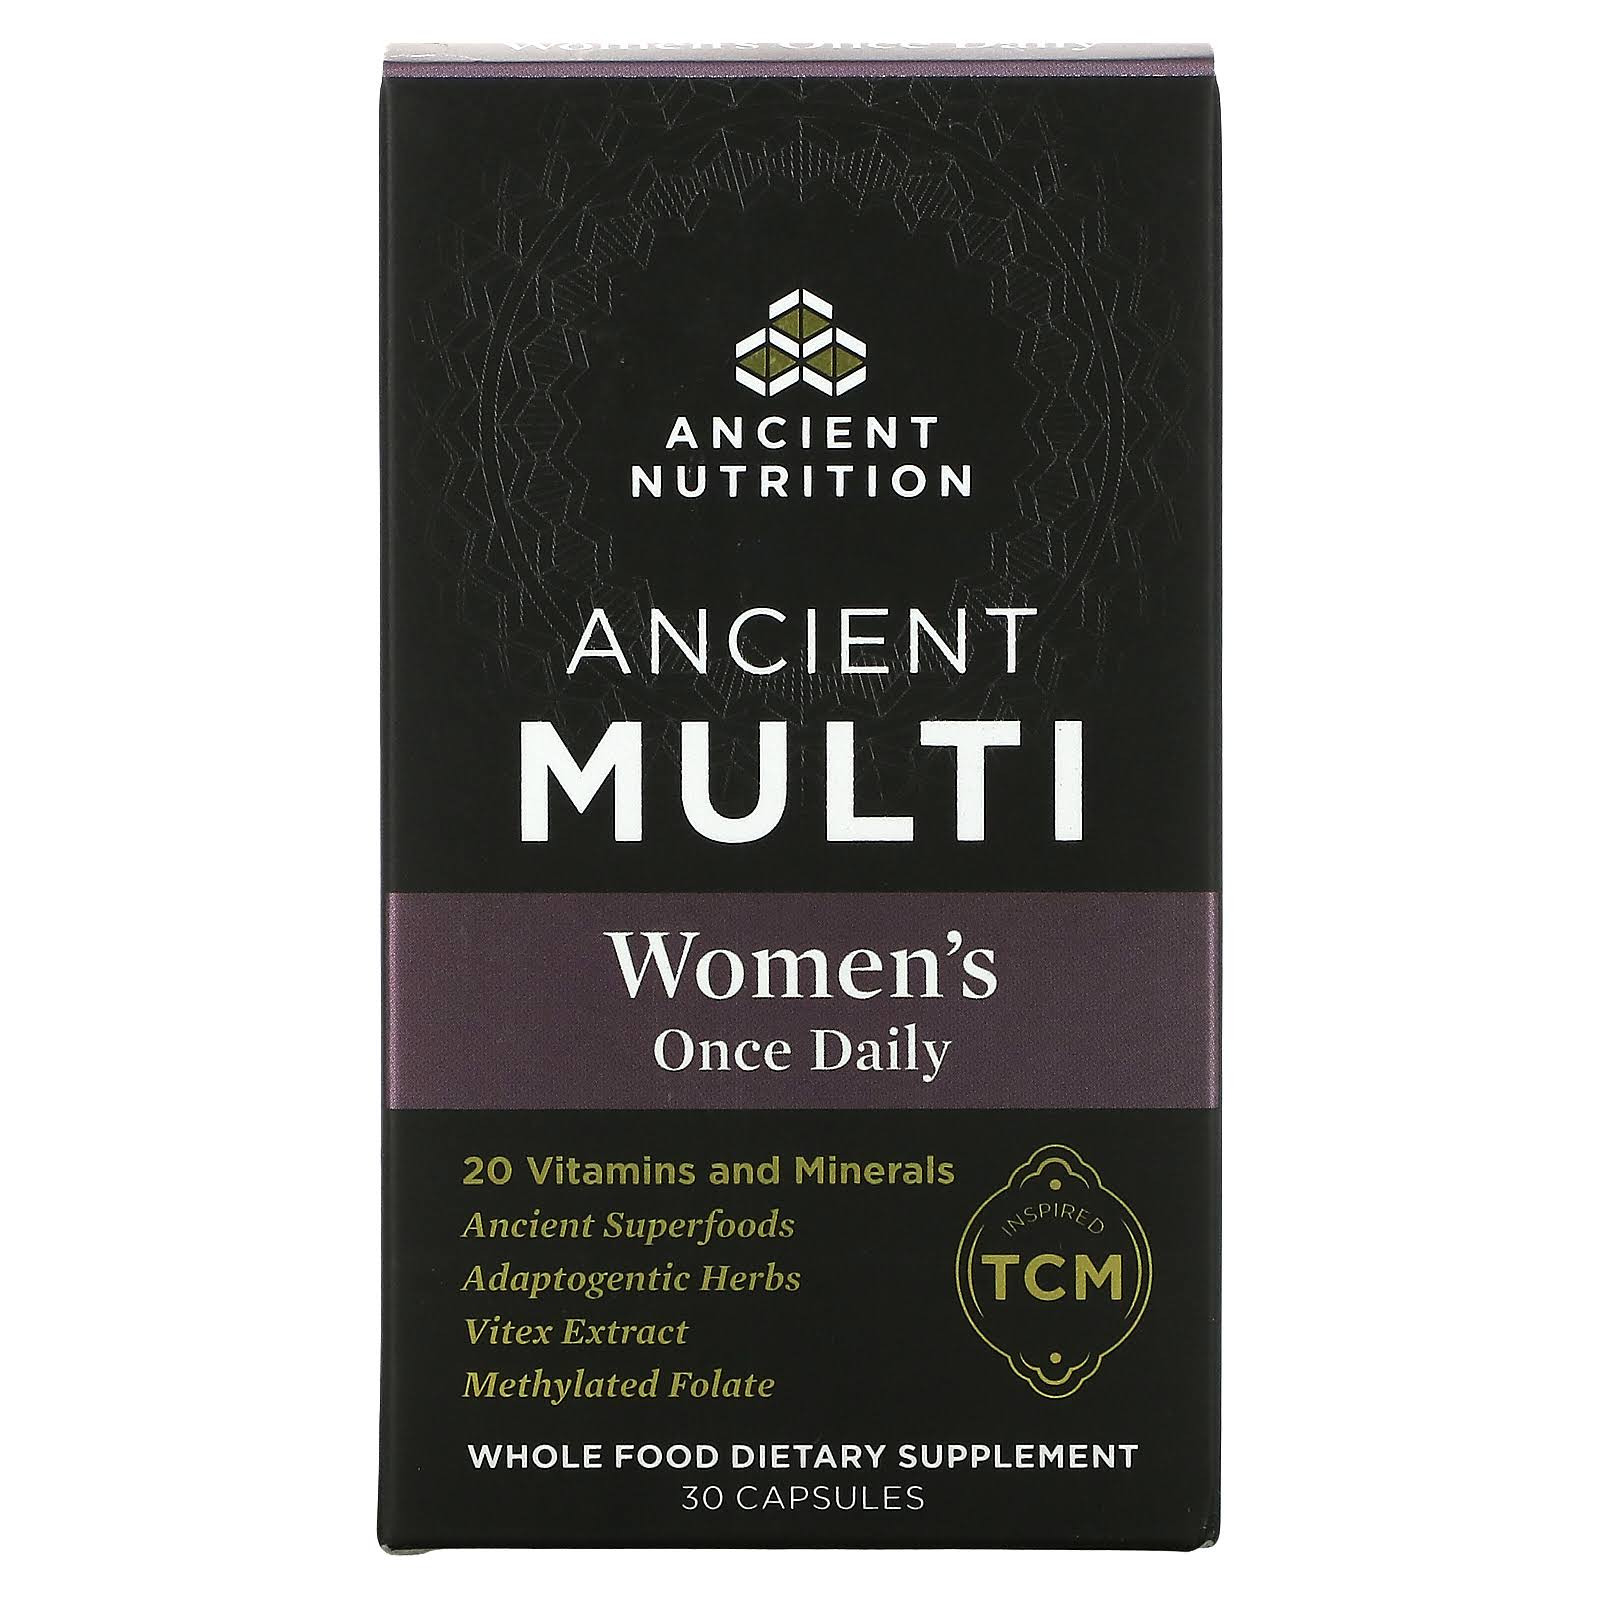 Ancient Nutrition Ancient Multi Women’s Once Daily Supplement - 30 Capsules